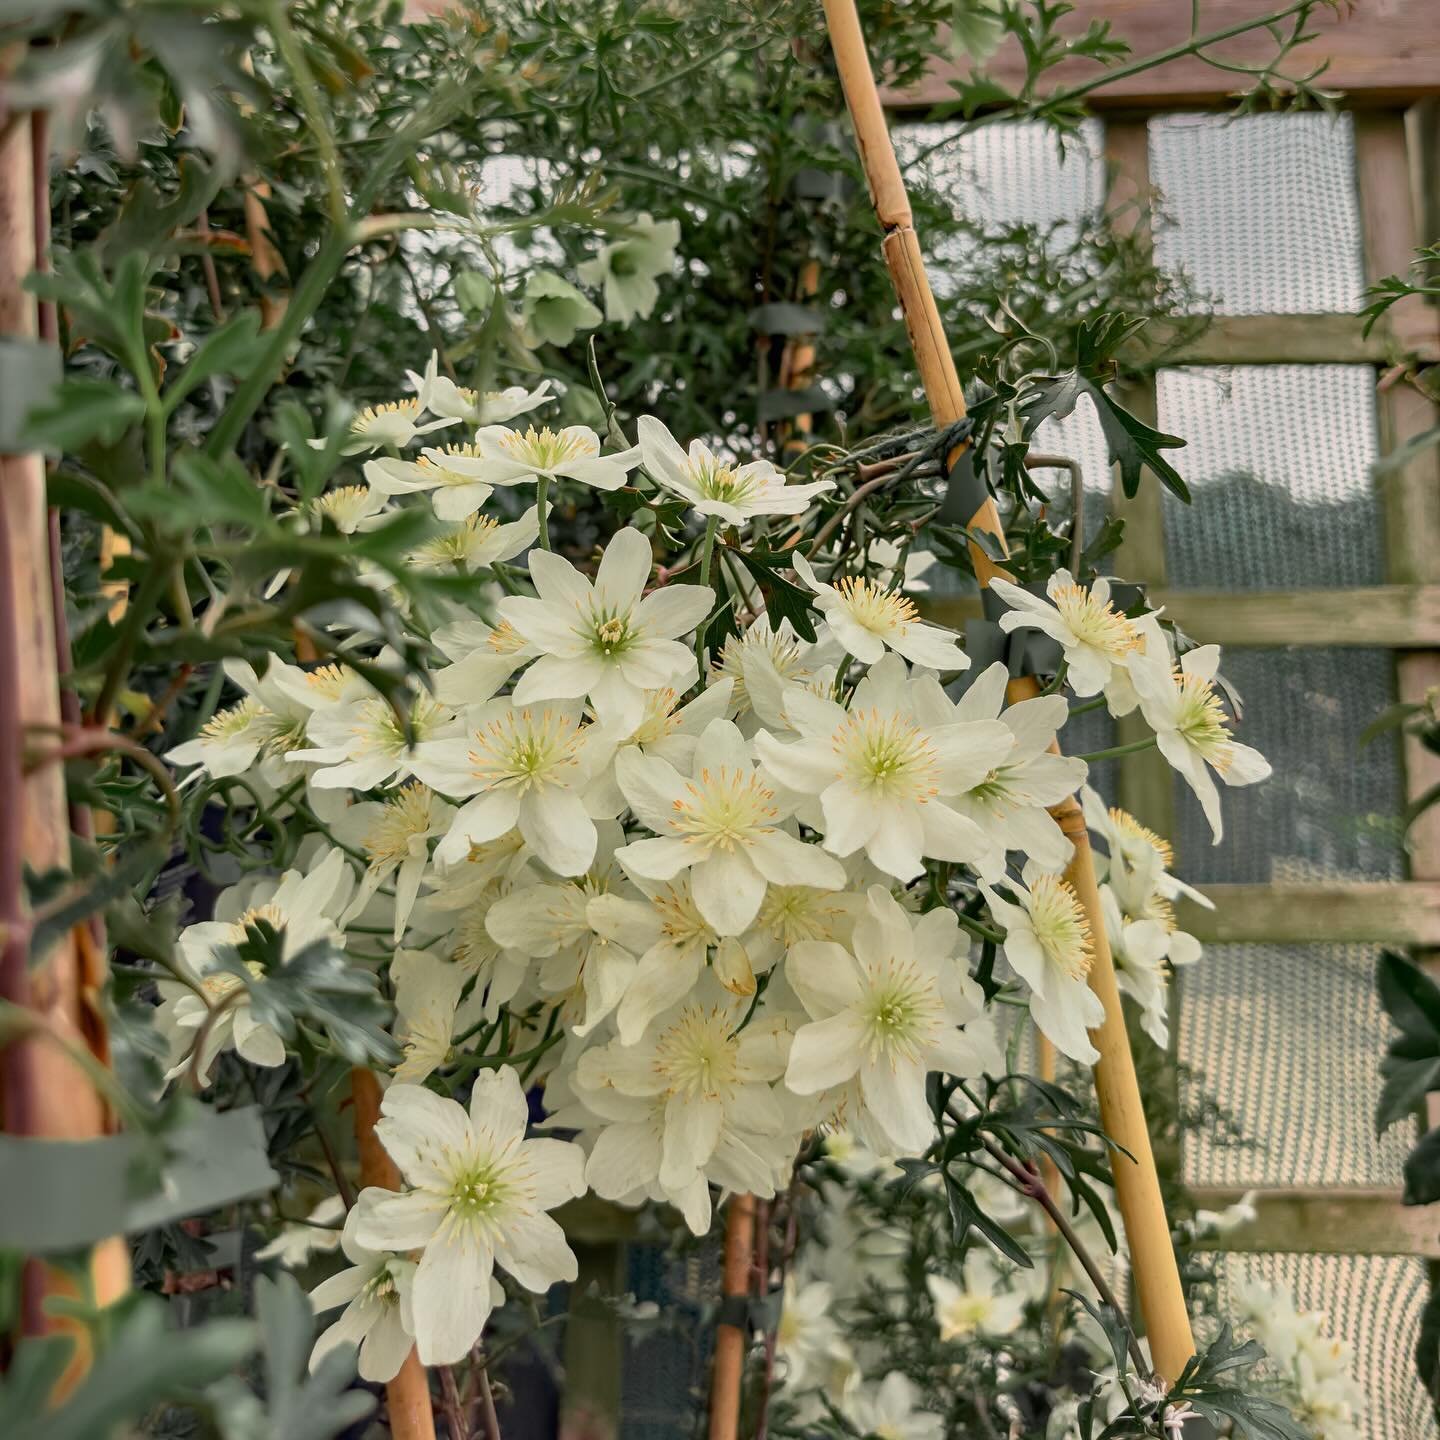 Our Clematis are climbing into Summer!
These climbers are perfect for adding colour and vertical interest throughout the late spring and summer months. 

#theplantplace #clematis #garden #gardeninspiration